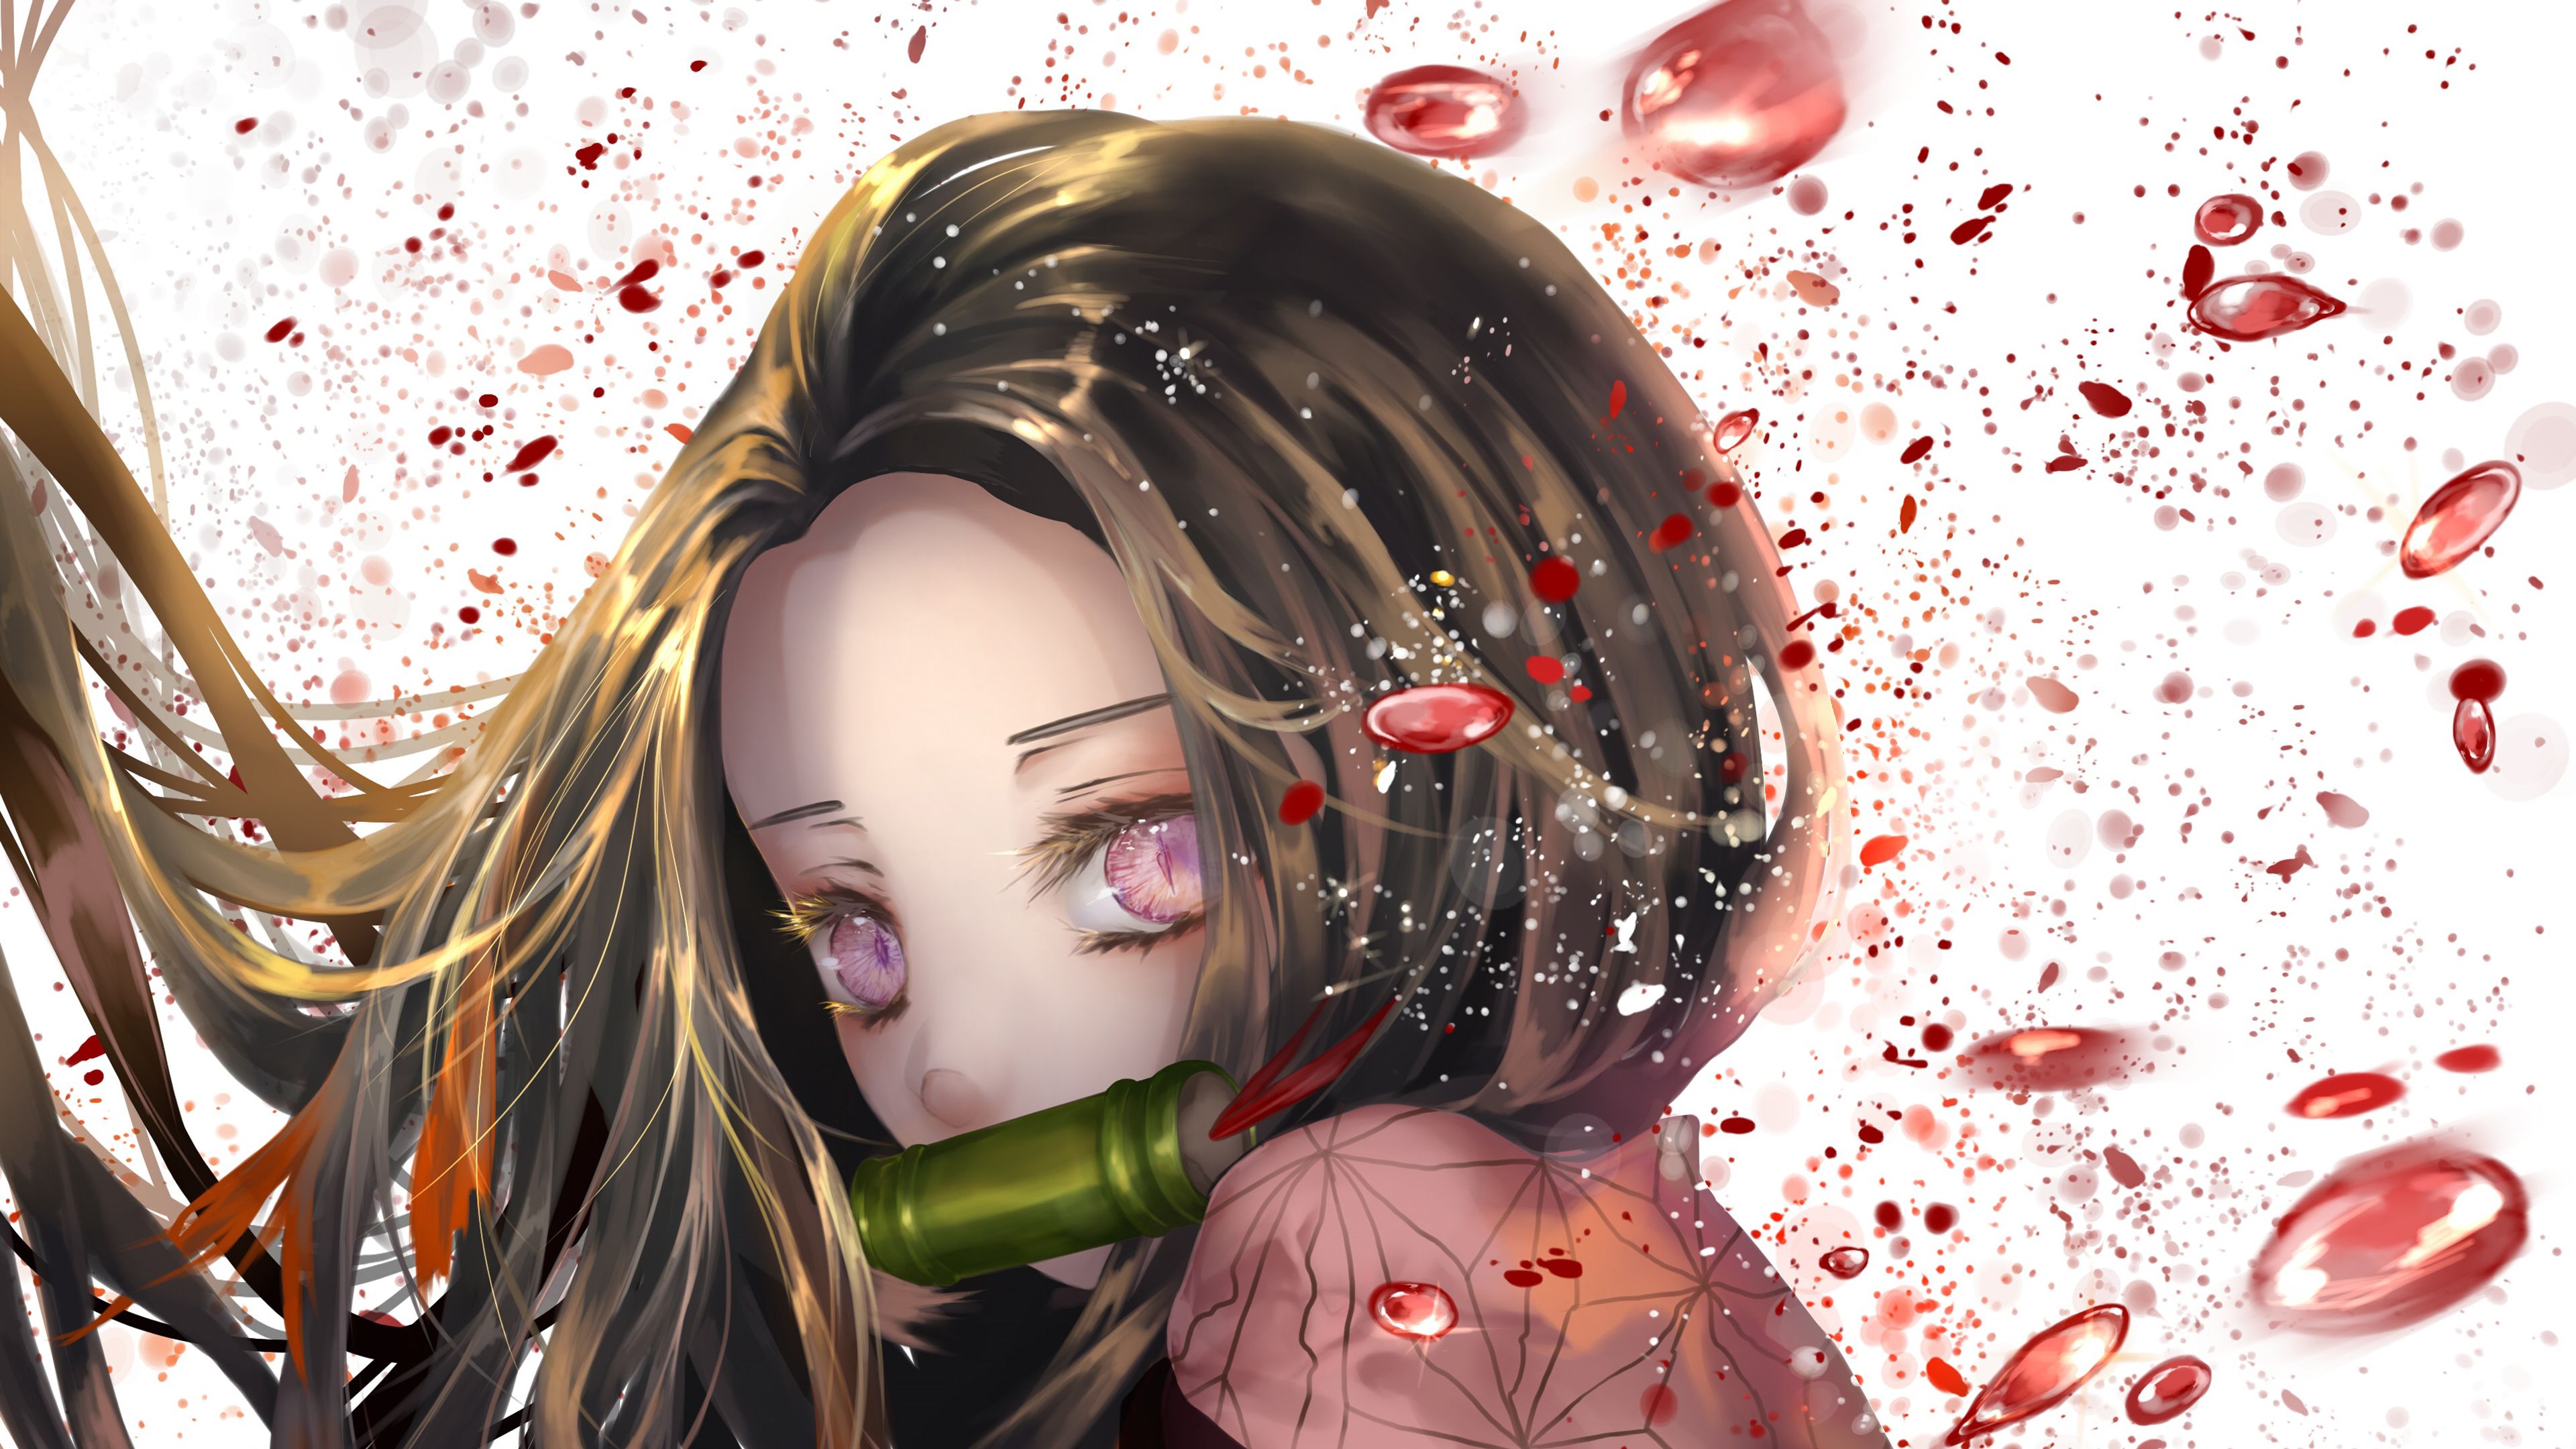 Demon Slayer Nezuko Kamado With Background Of White And Red Dots 4K HD Anime Wallpaper</a> Wallpaper